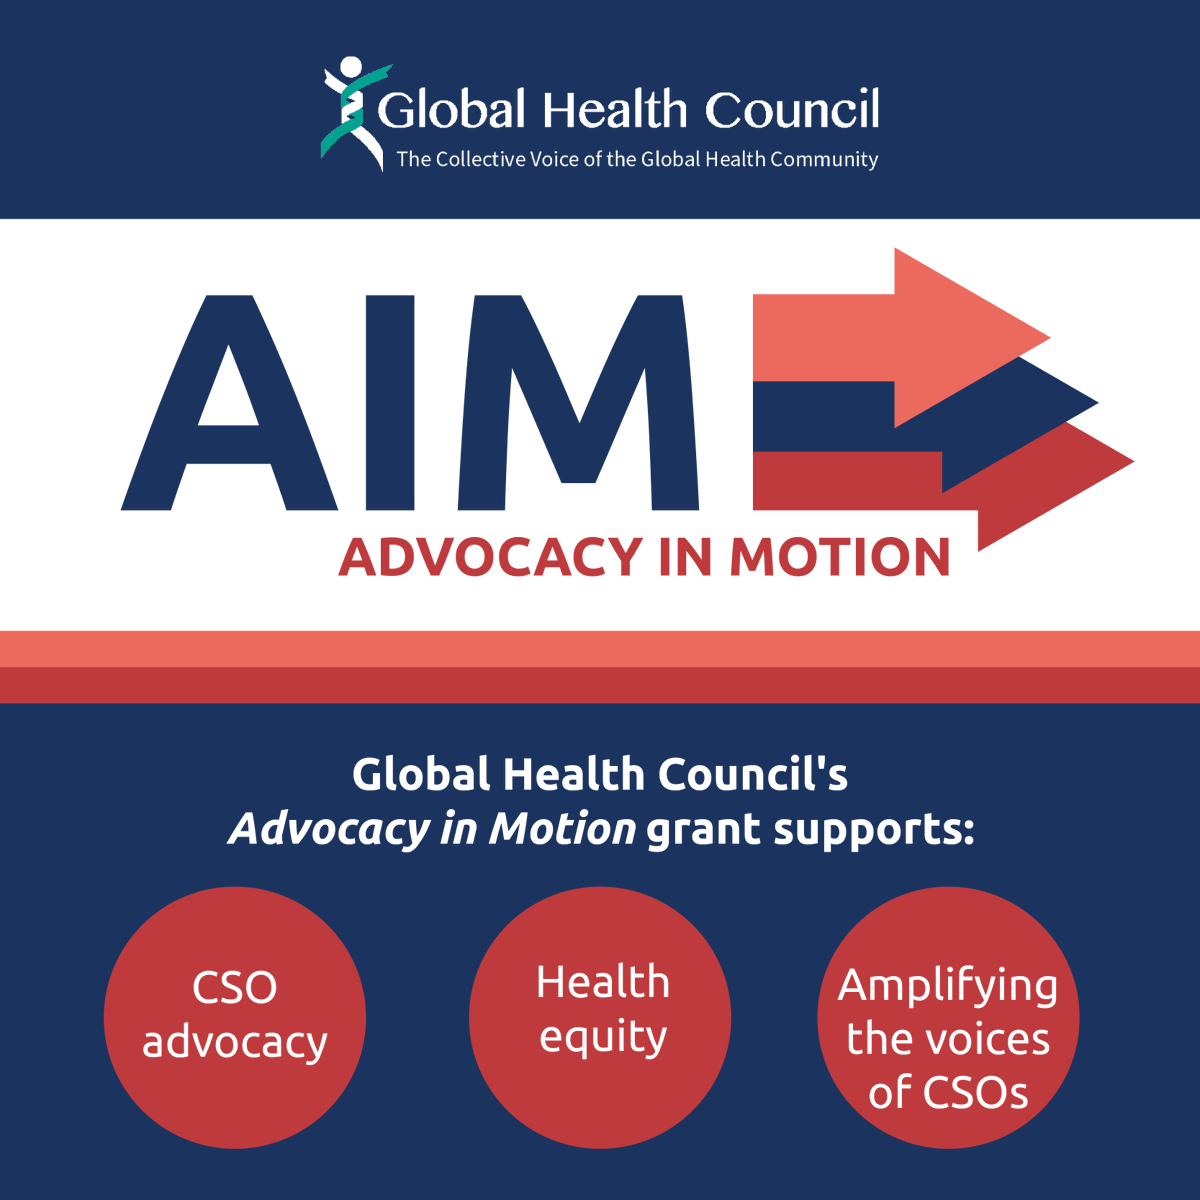 The Advocacy in Motion grant, recently announced by @GlobalHealthOrg, supports #CivilSocietyOrganizations advocacy efforts, #HealthEquity & amplifying the voices of #CSOs. Learn more about the grant & the 2022 winners bit.ly/AIMGrants